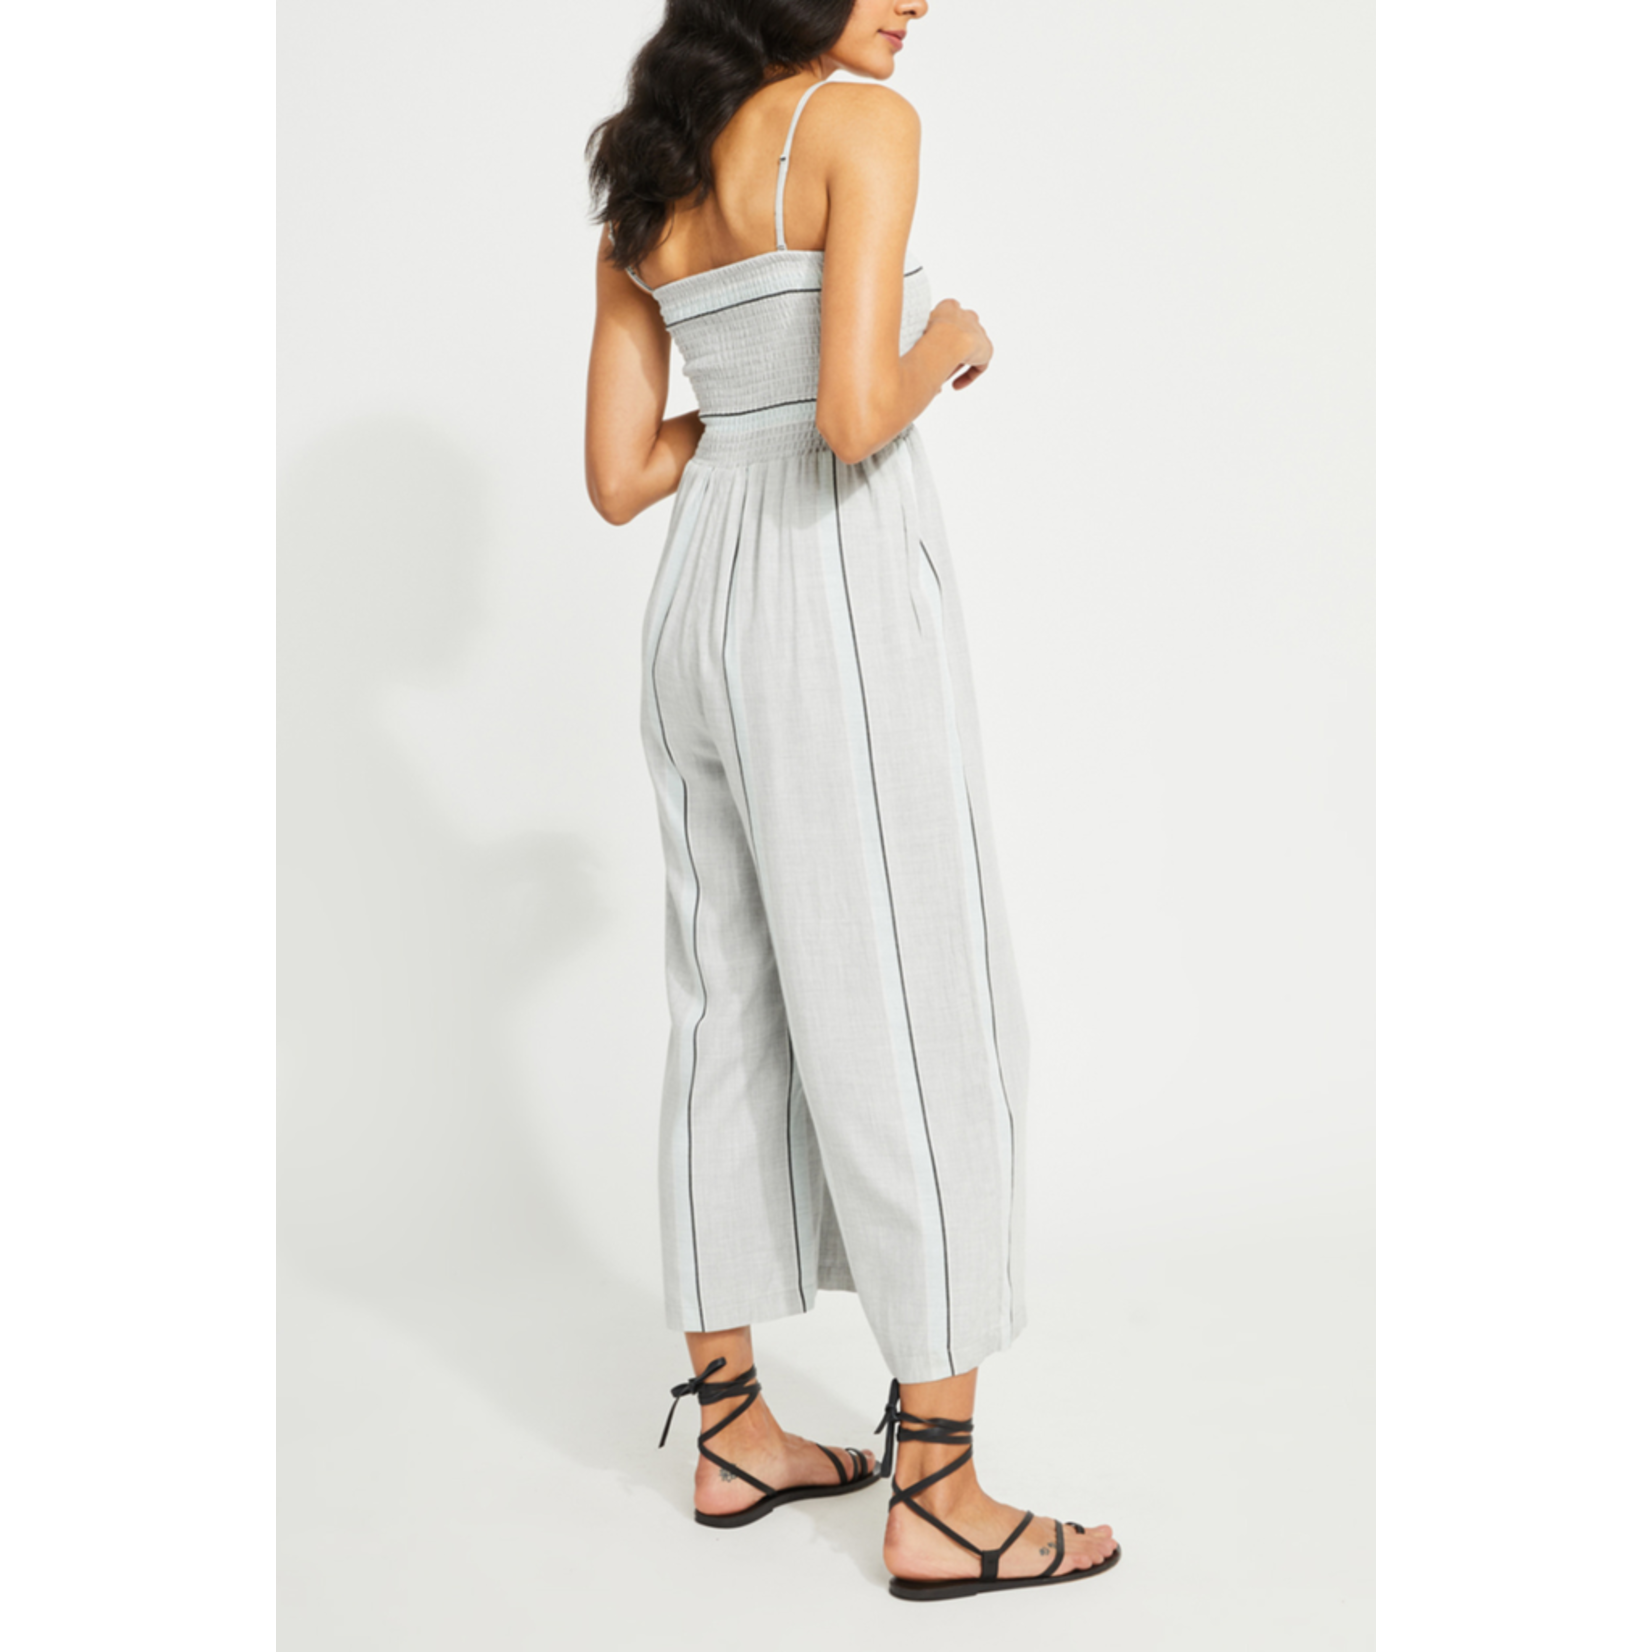 Gentle Fawn Striped smocked jumpsuit